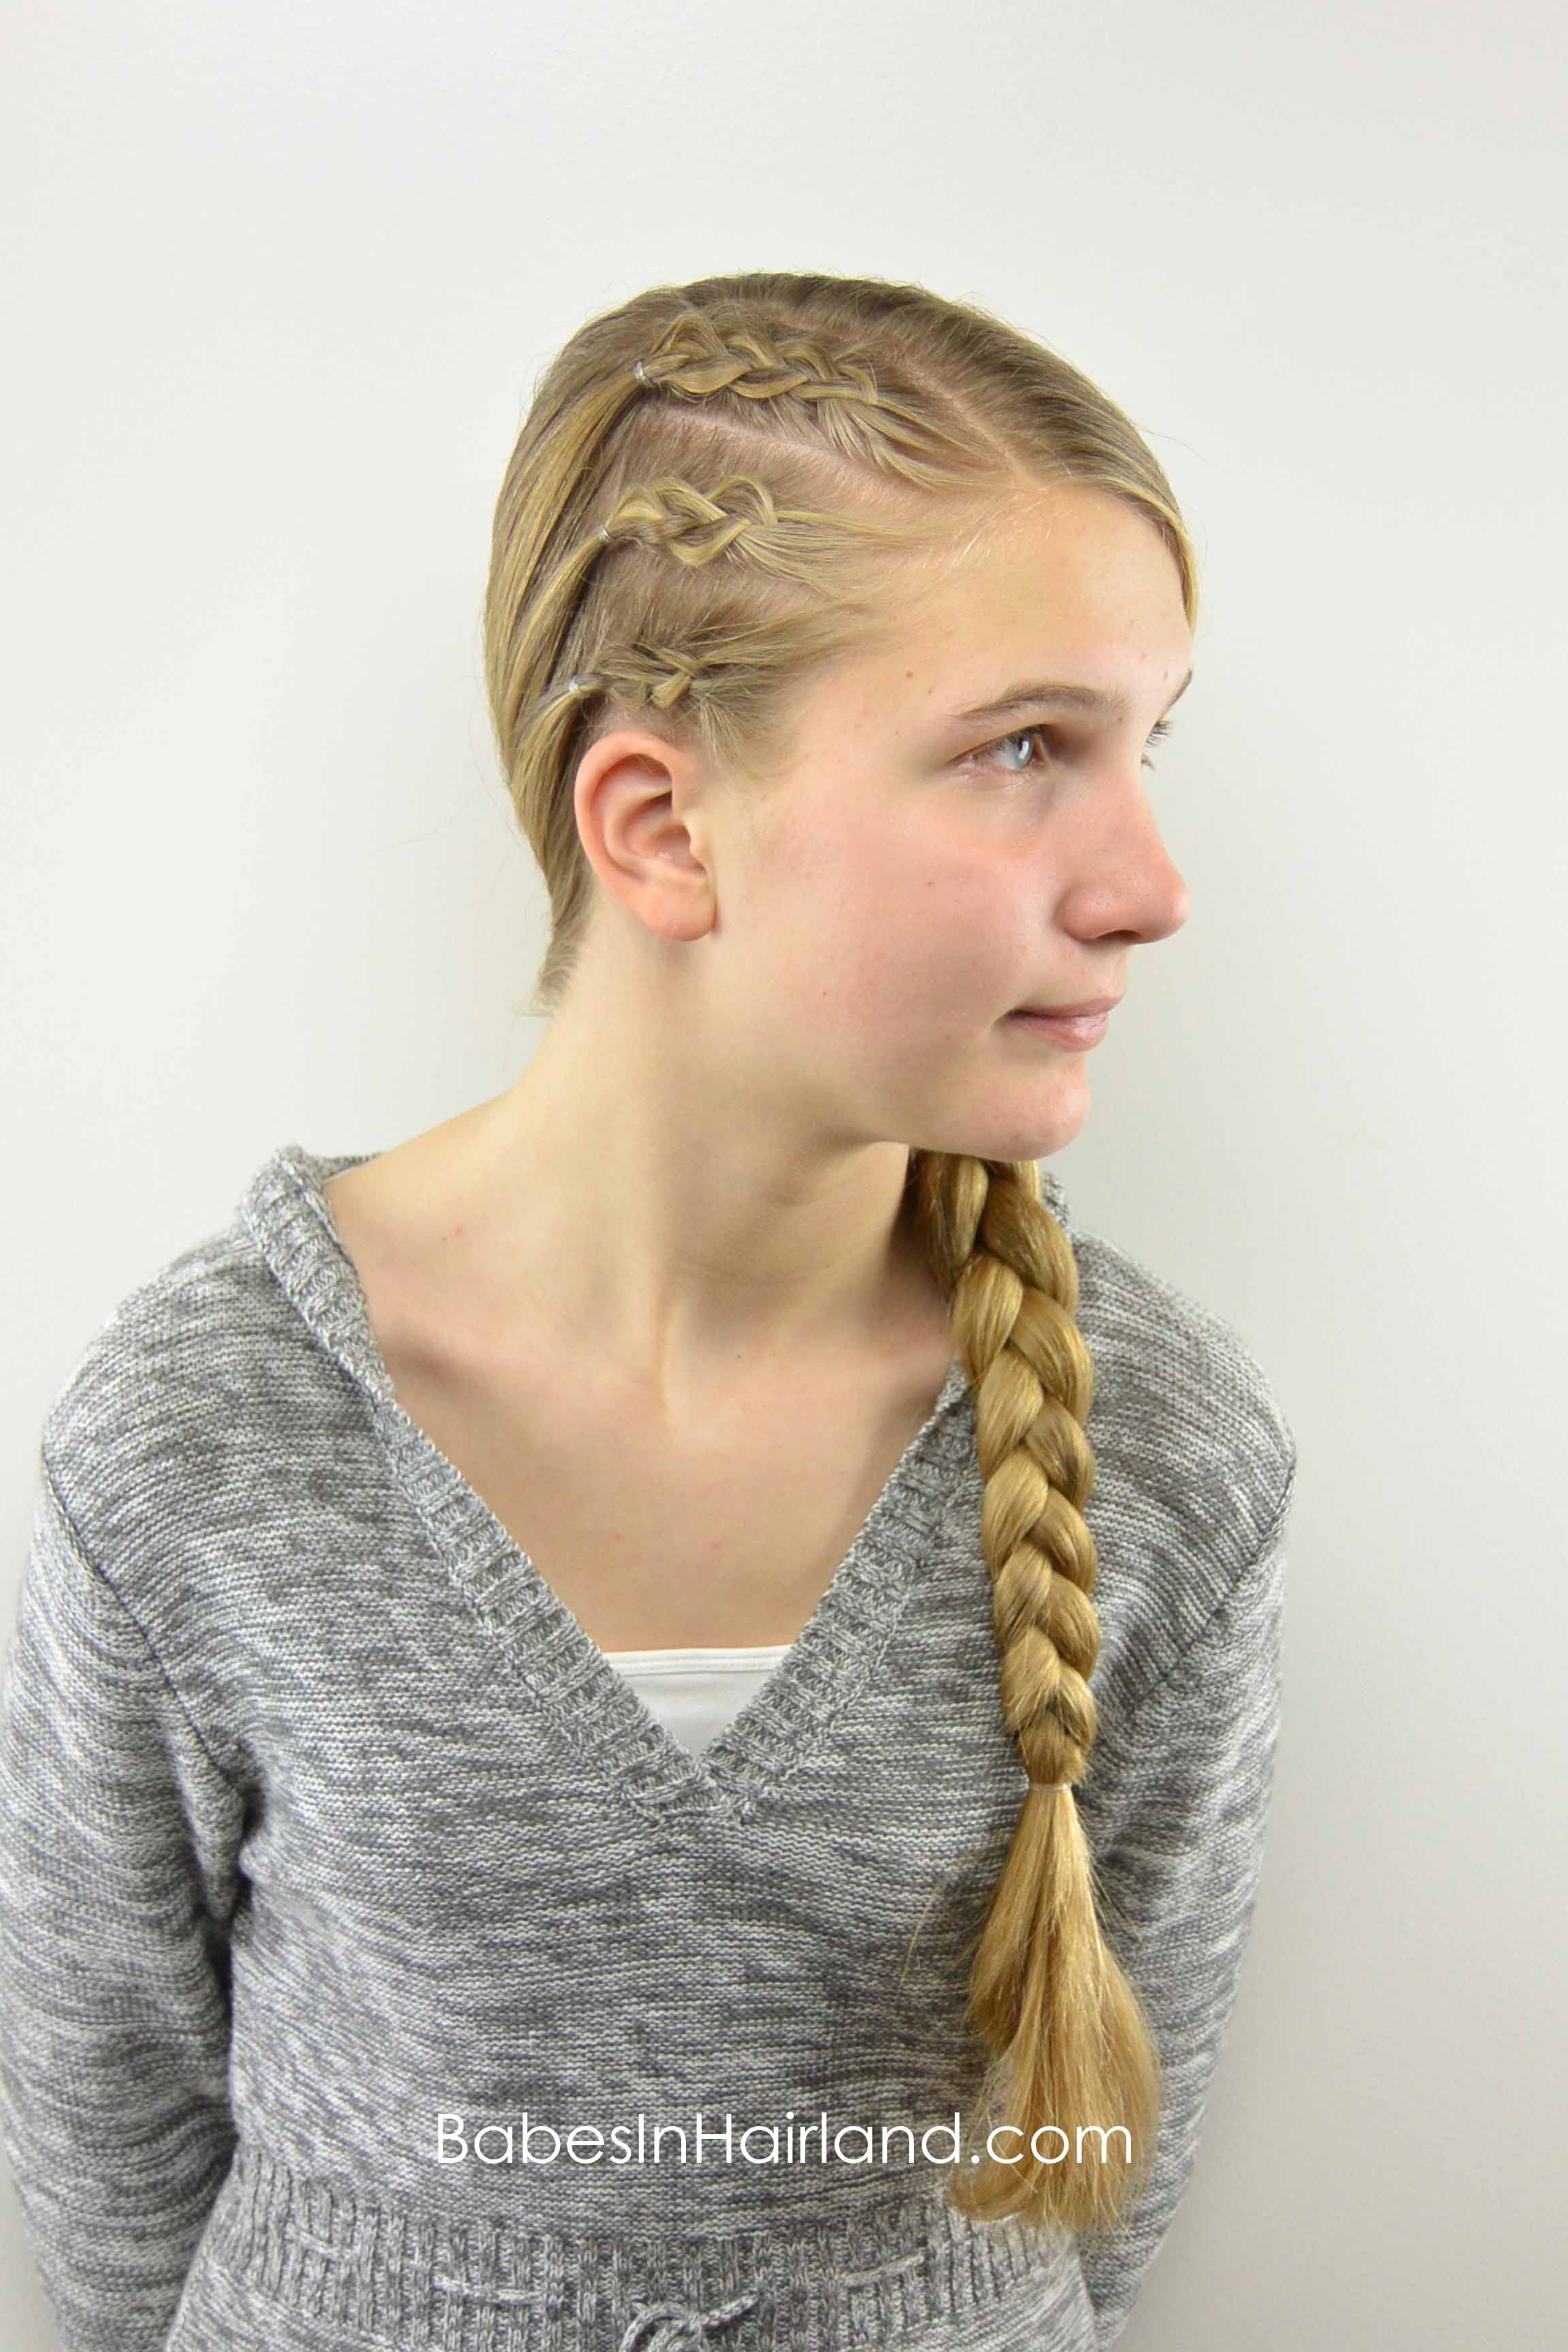 Edgy Teen Hairstyles 91